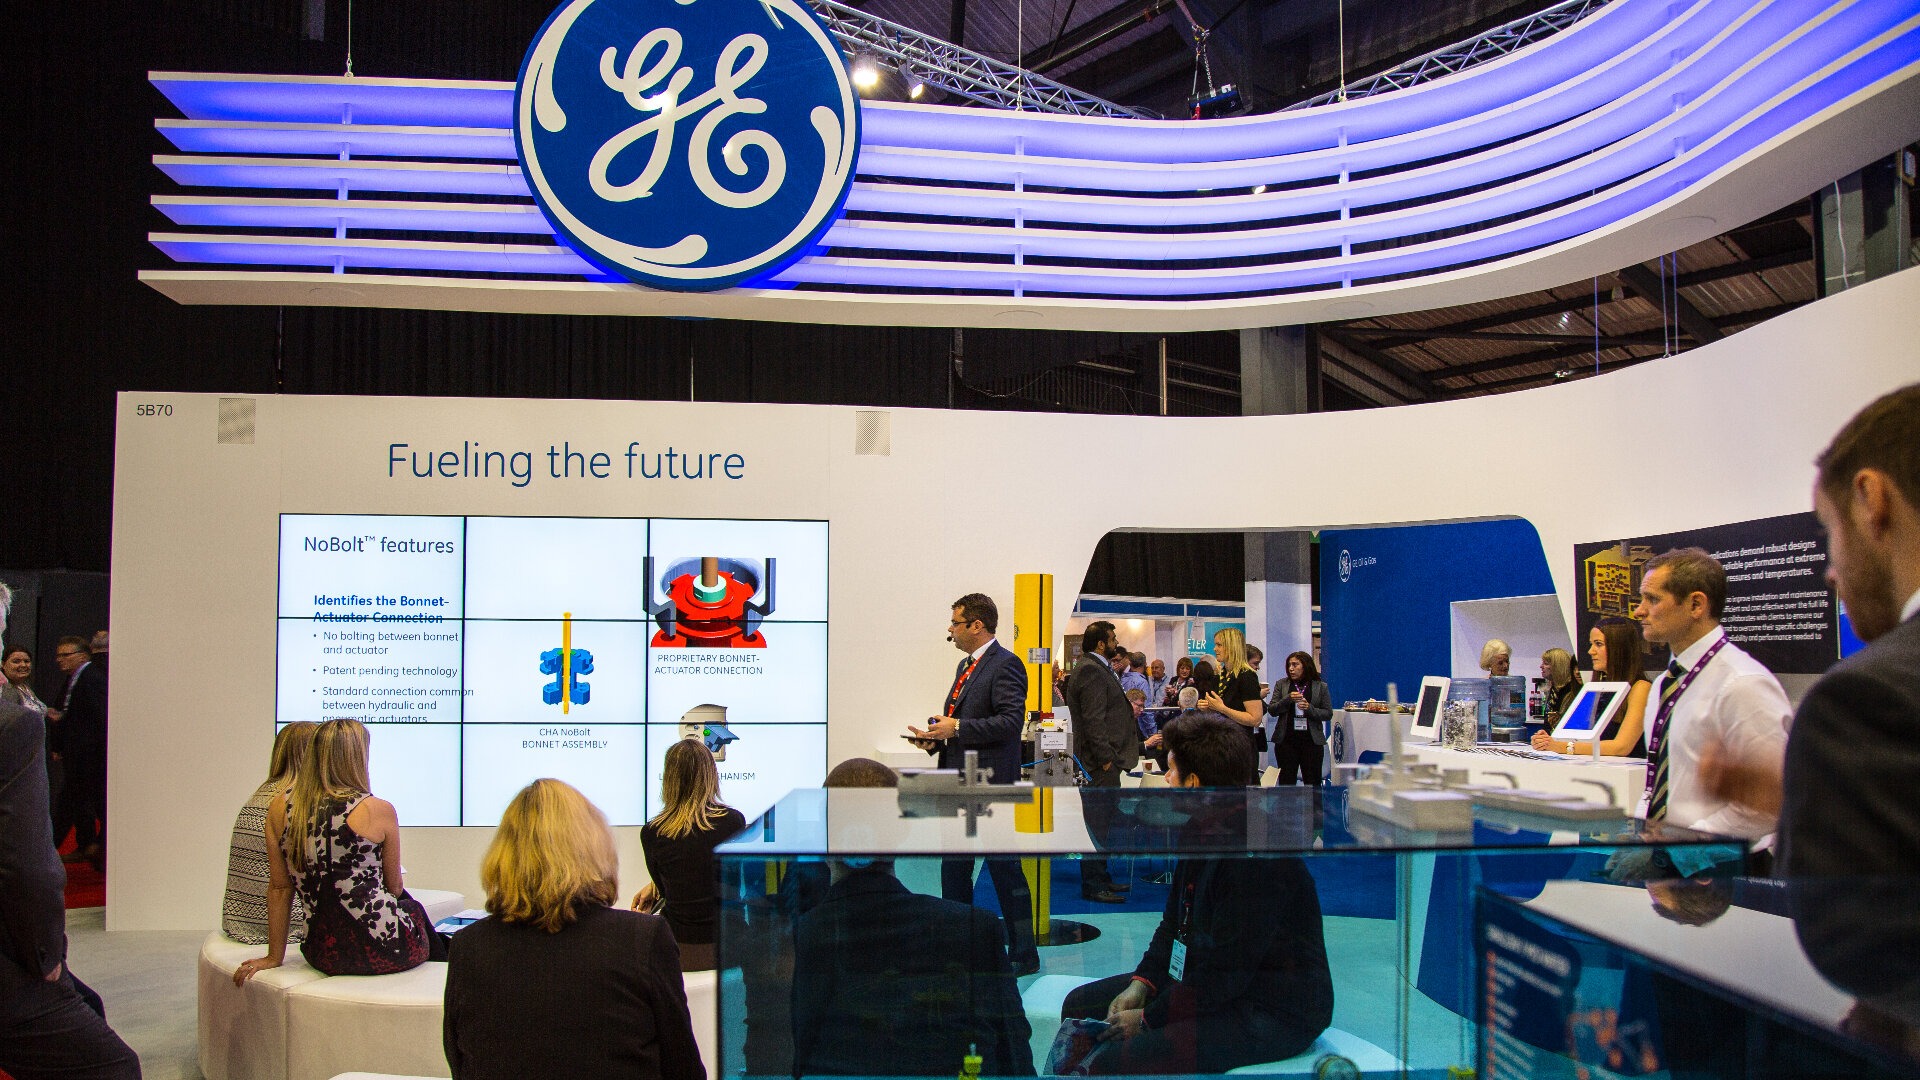 people watching a ge offshore presentation at an exhibition